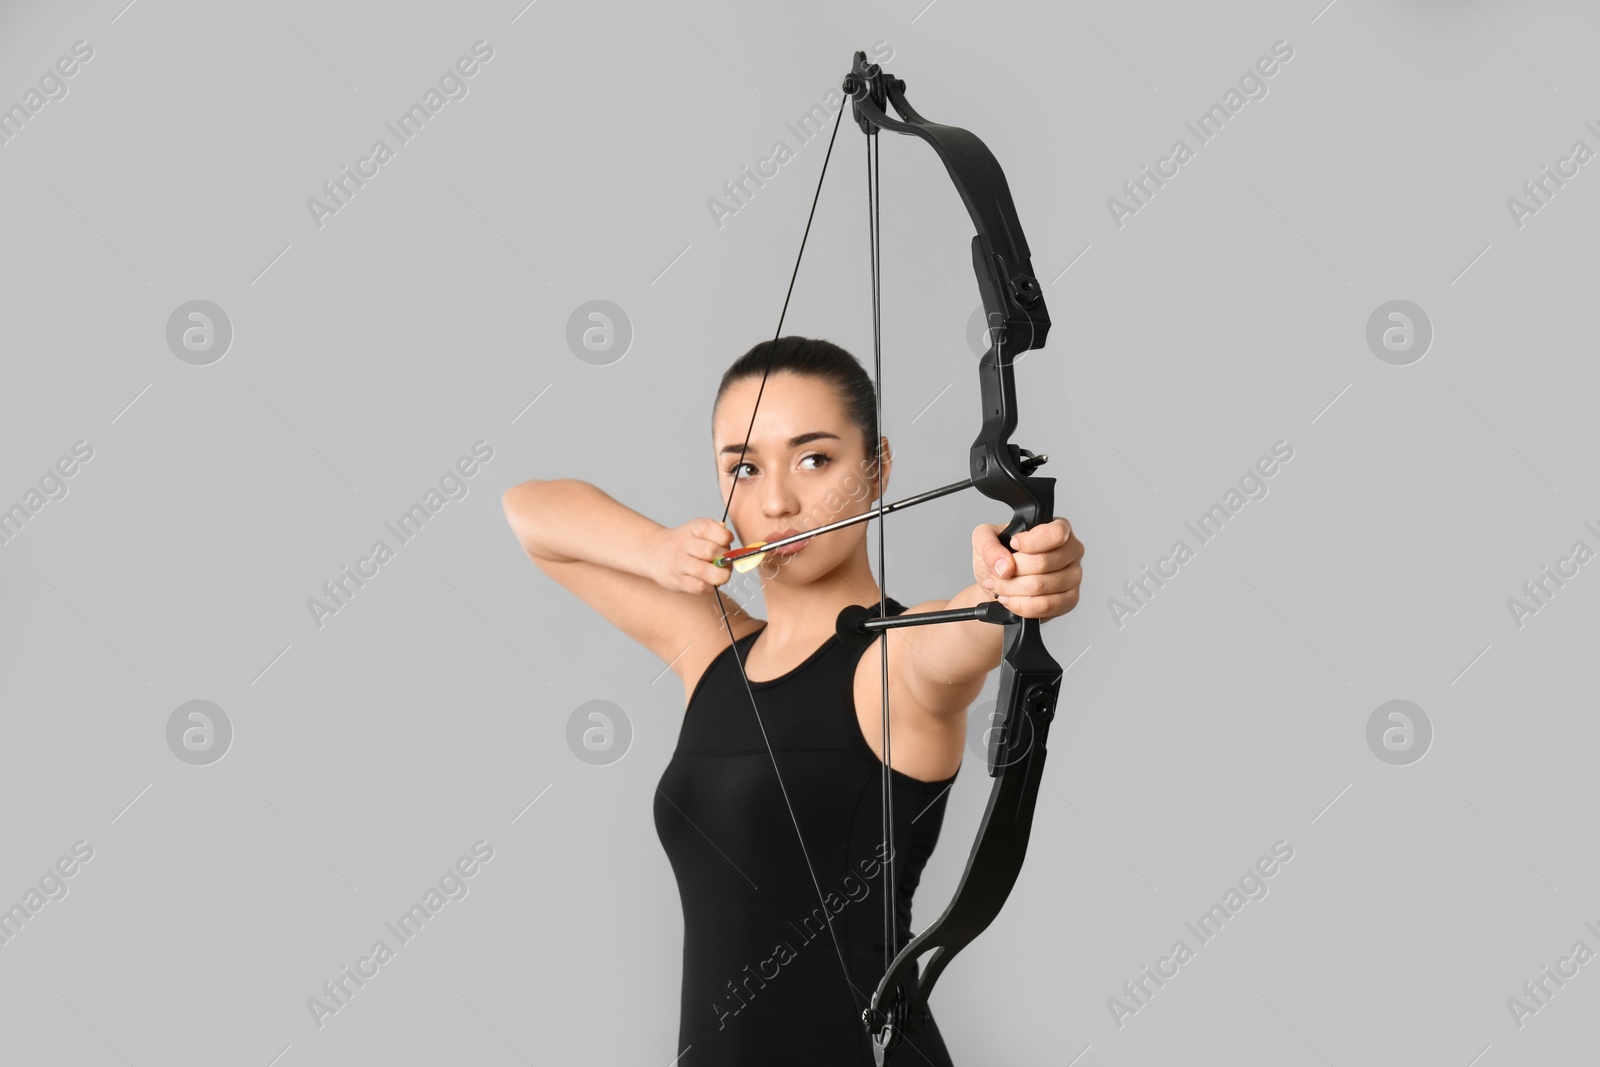 Photo of Young woman practicing archery on light grey background